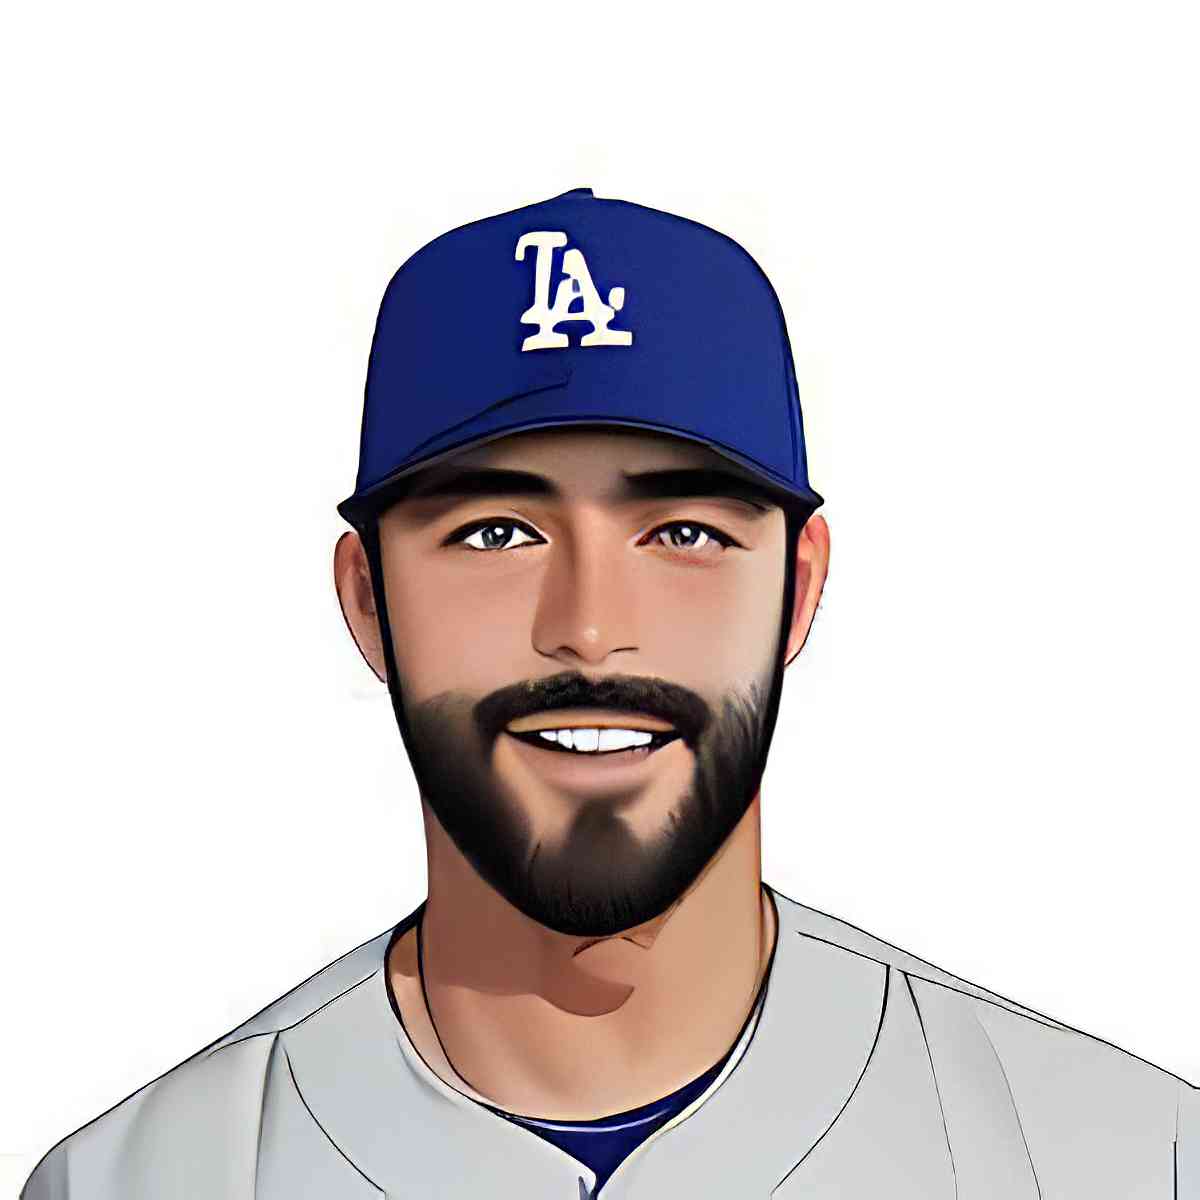 Andre Ethier - Wikipedia